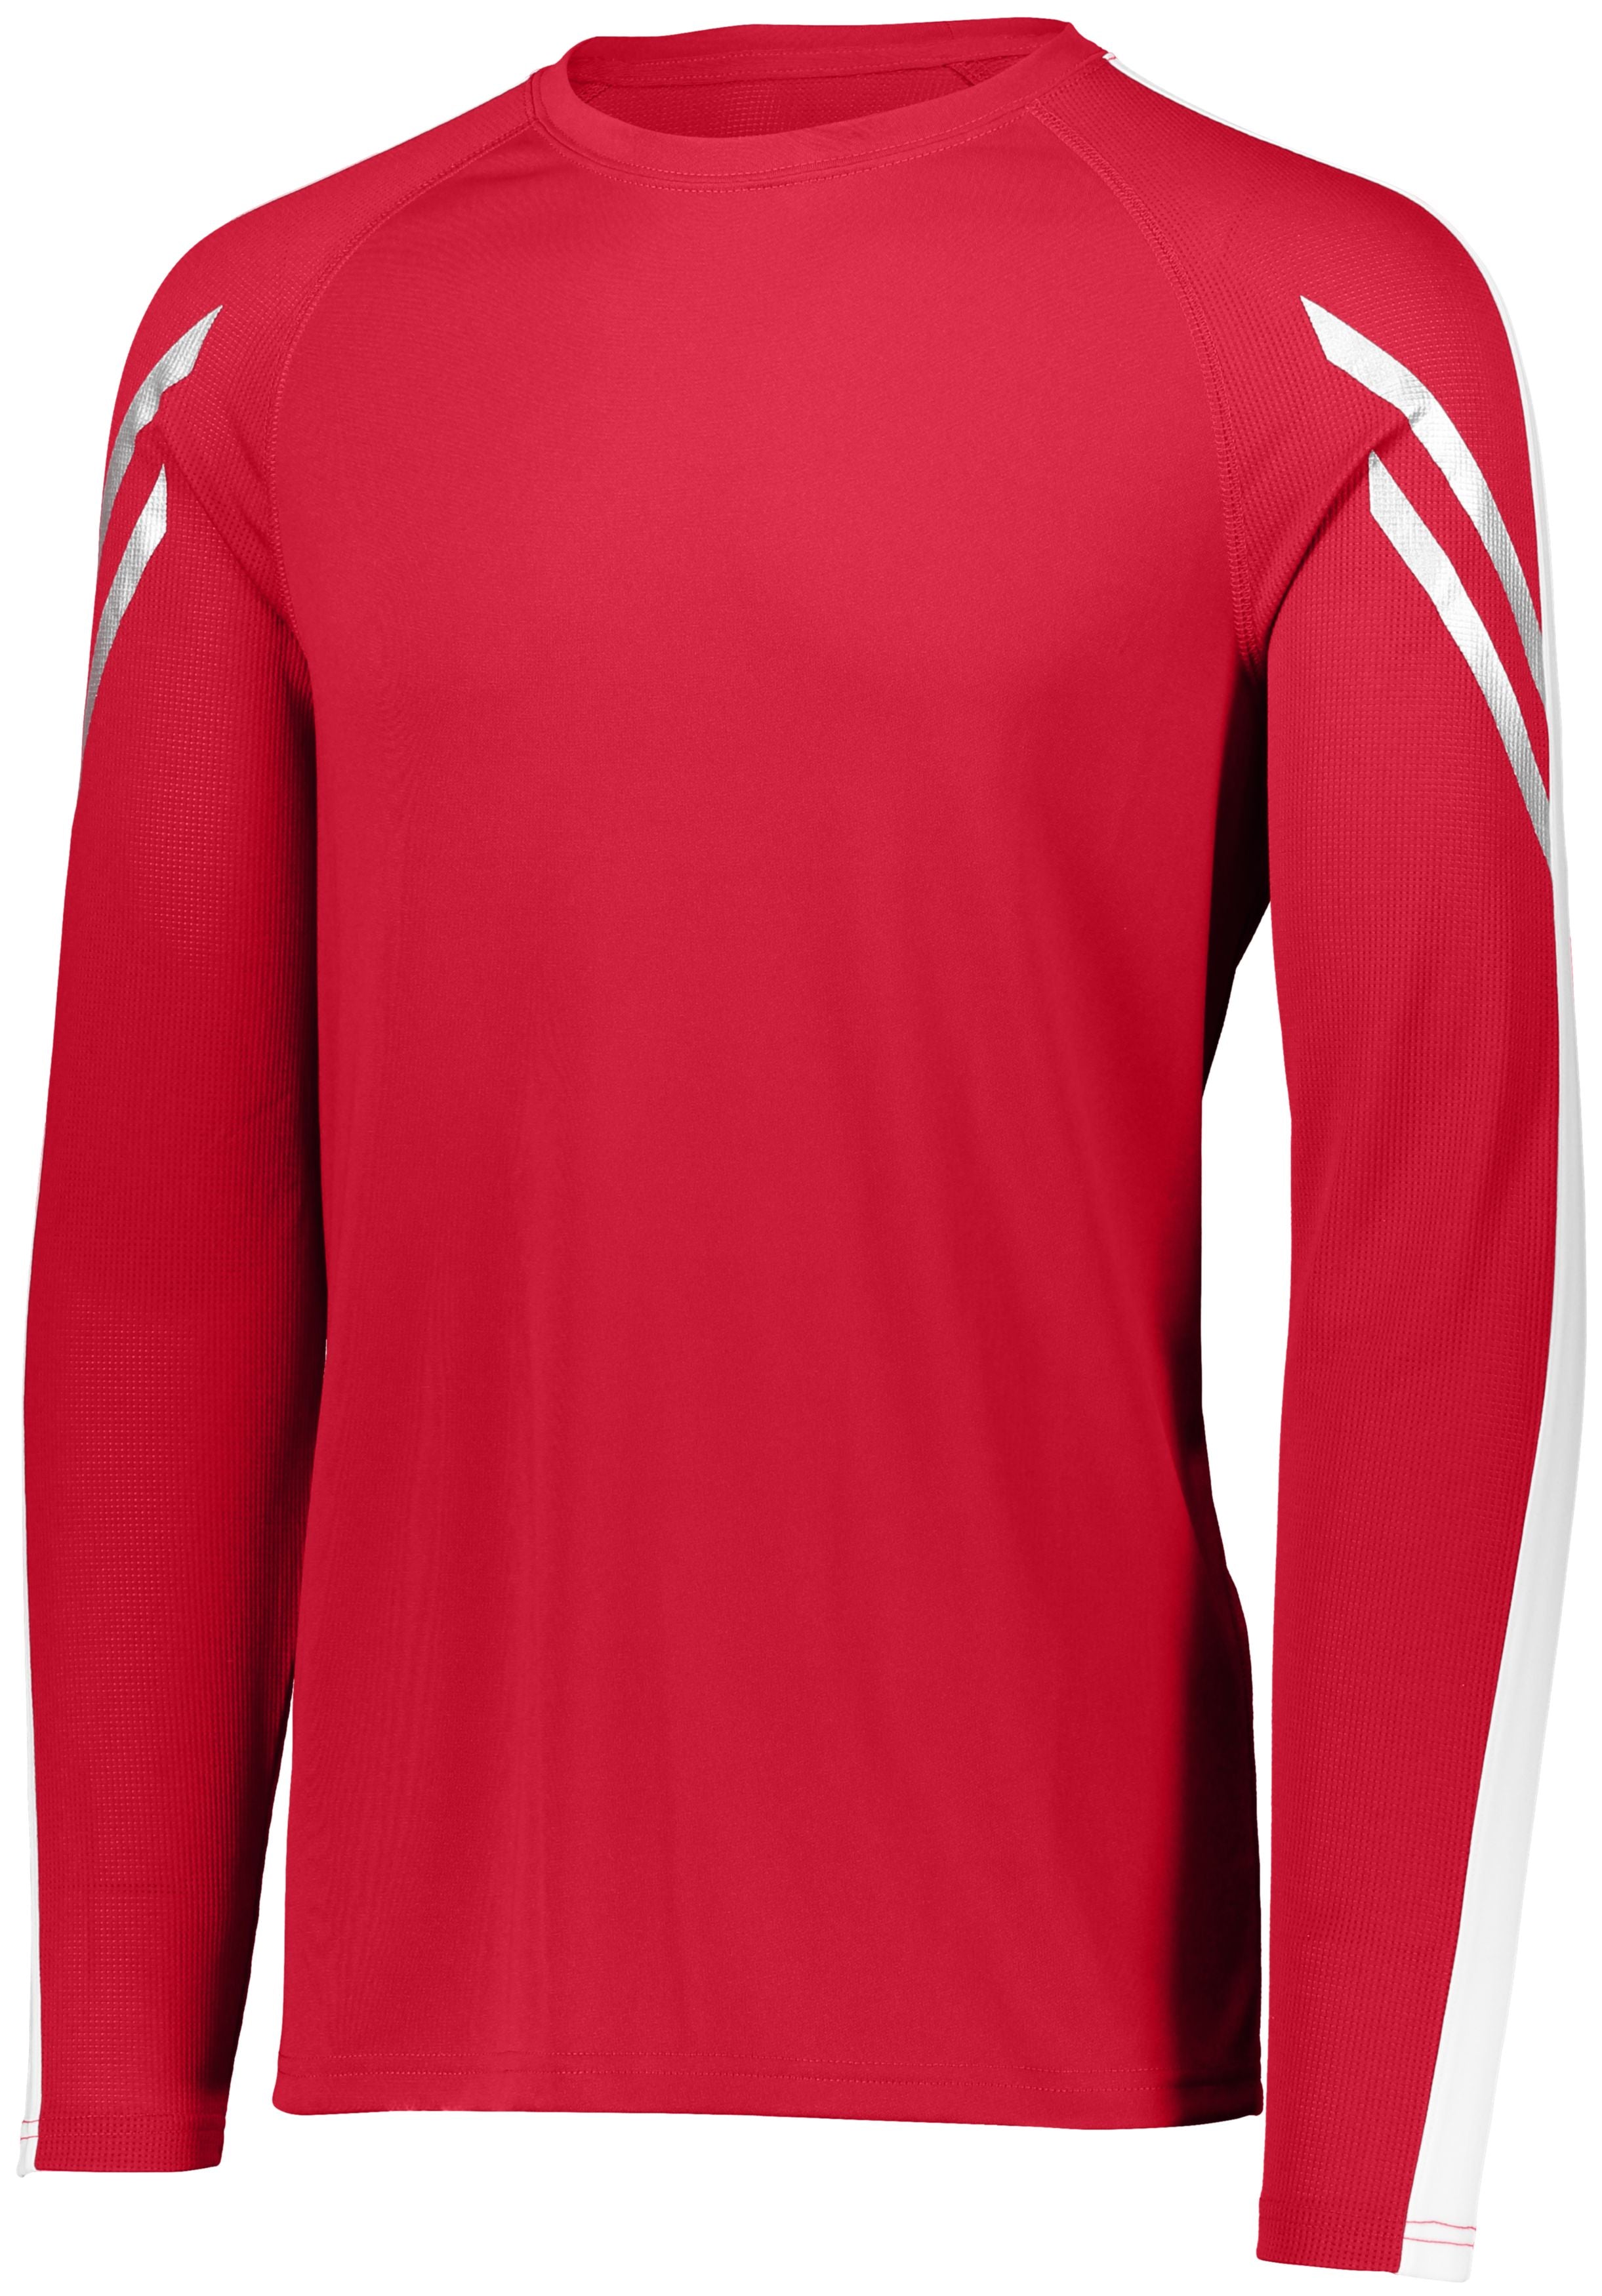 Holloway Flux Shirt Long Sleeve in Scarlet/White  -Part of the Adult, Holloway, Shirts, Flux-Collection product lines at KanaleyCreations.com